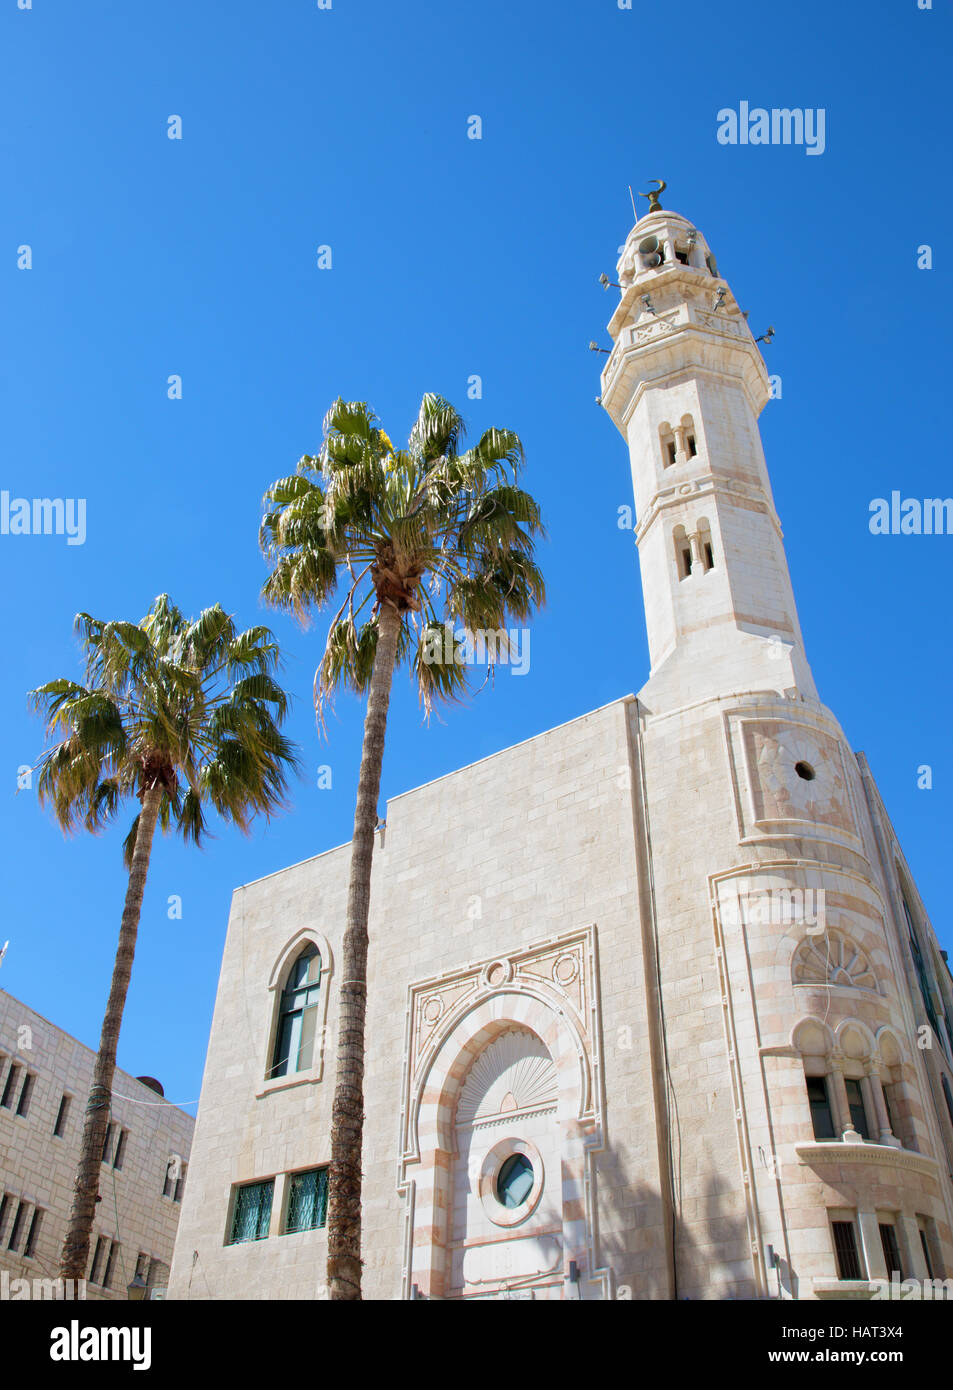 BETHLEHEM, ISRAEL - MARCH 6, 2015: The Mosque of Omar Stock Photo